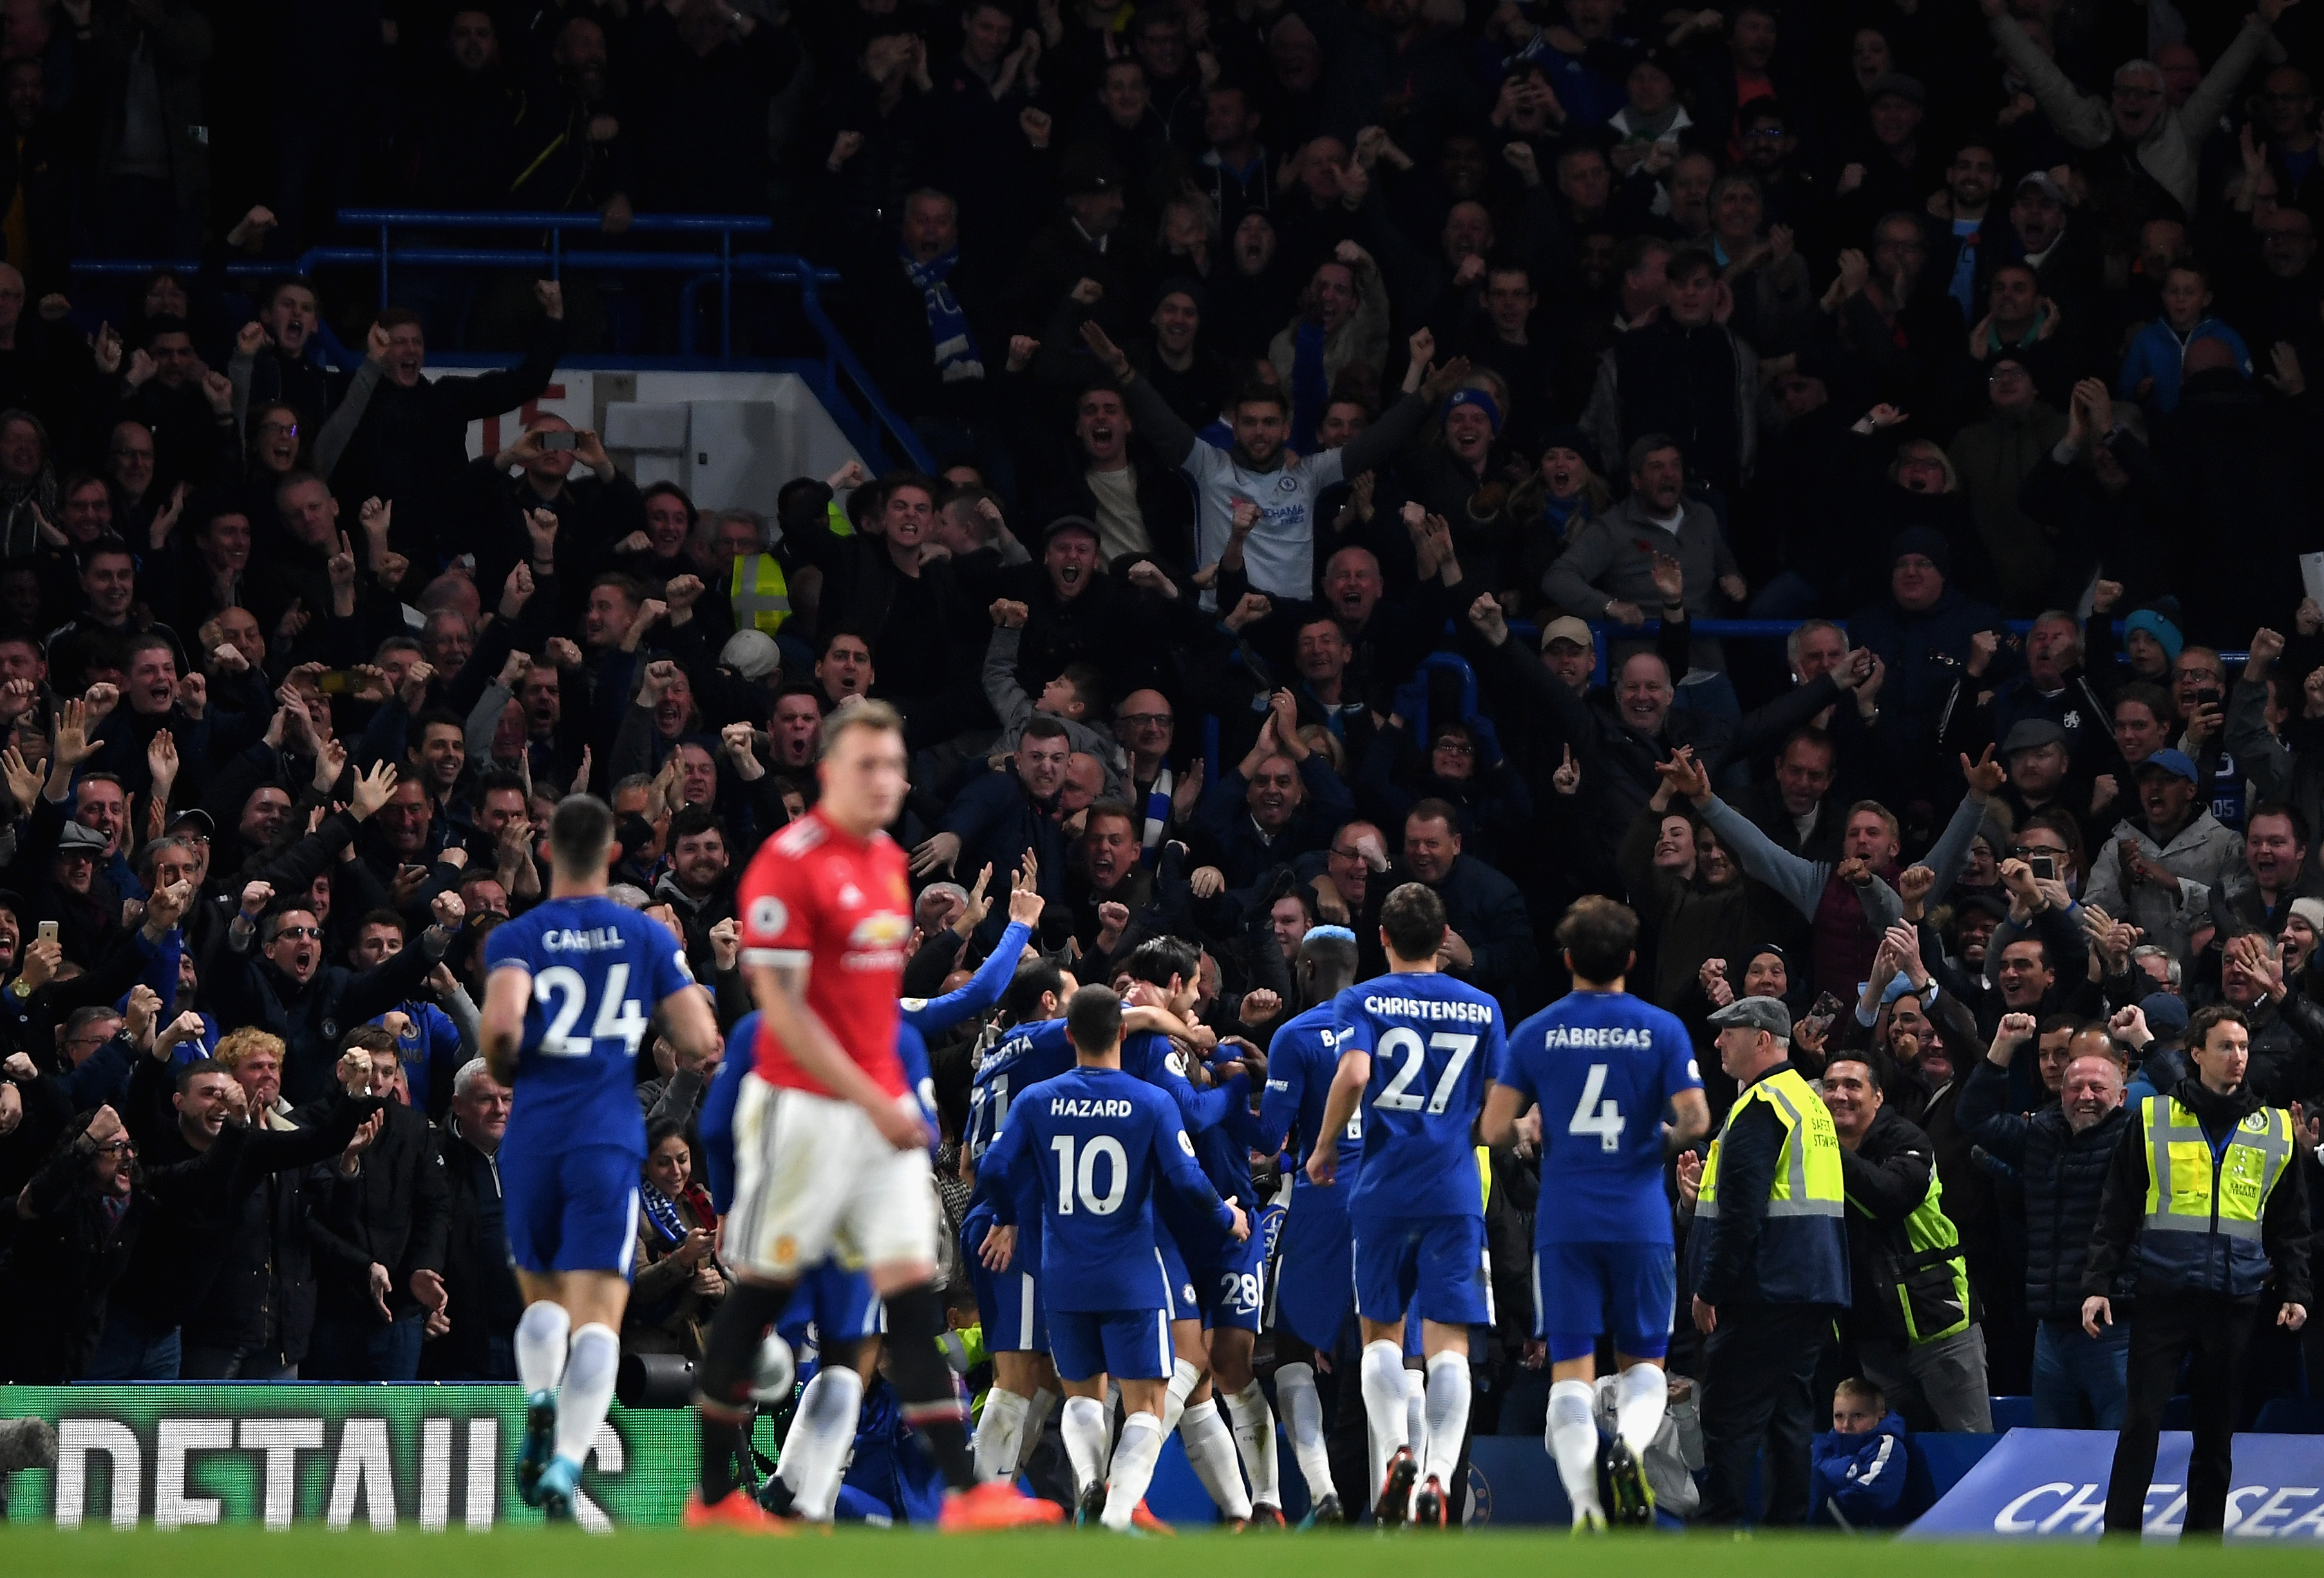 LONDON, ENGLAND - NOVEMBER 05: Alvaro Morata of Chelsea (obscure) celebrates scoring his sides first goal with his team mates during the Premier League match between Chelsea and Manchester United at Stamford Bridge on November 5, 2017 in London, England.  (Photo by Mike Hewitt/Getty Images)